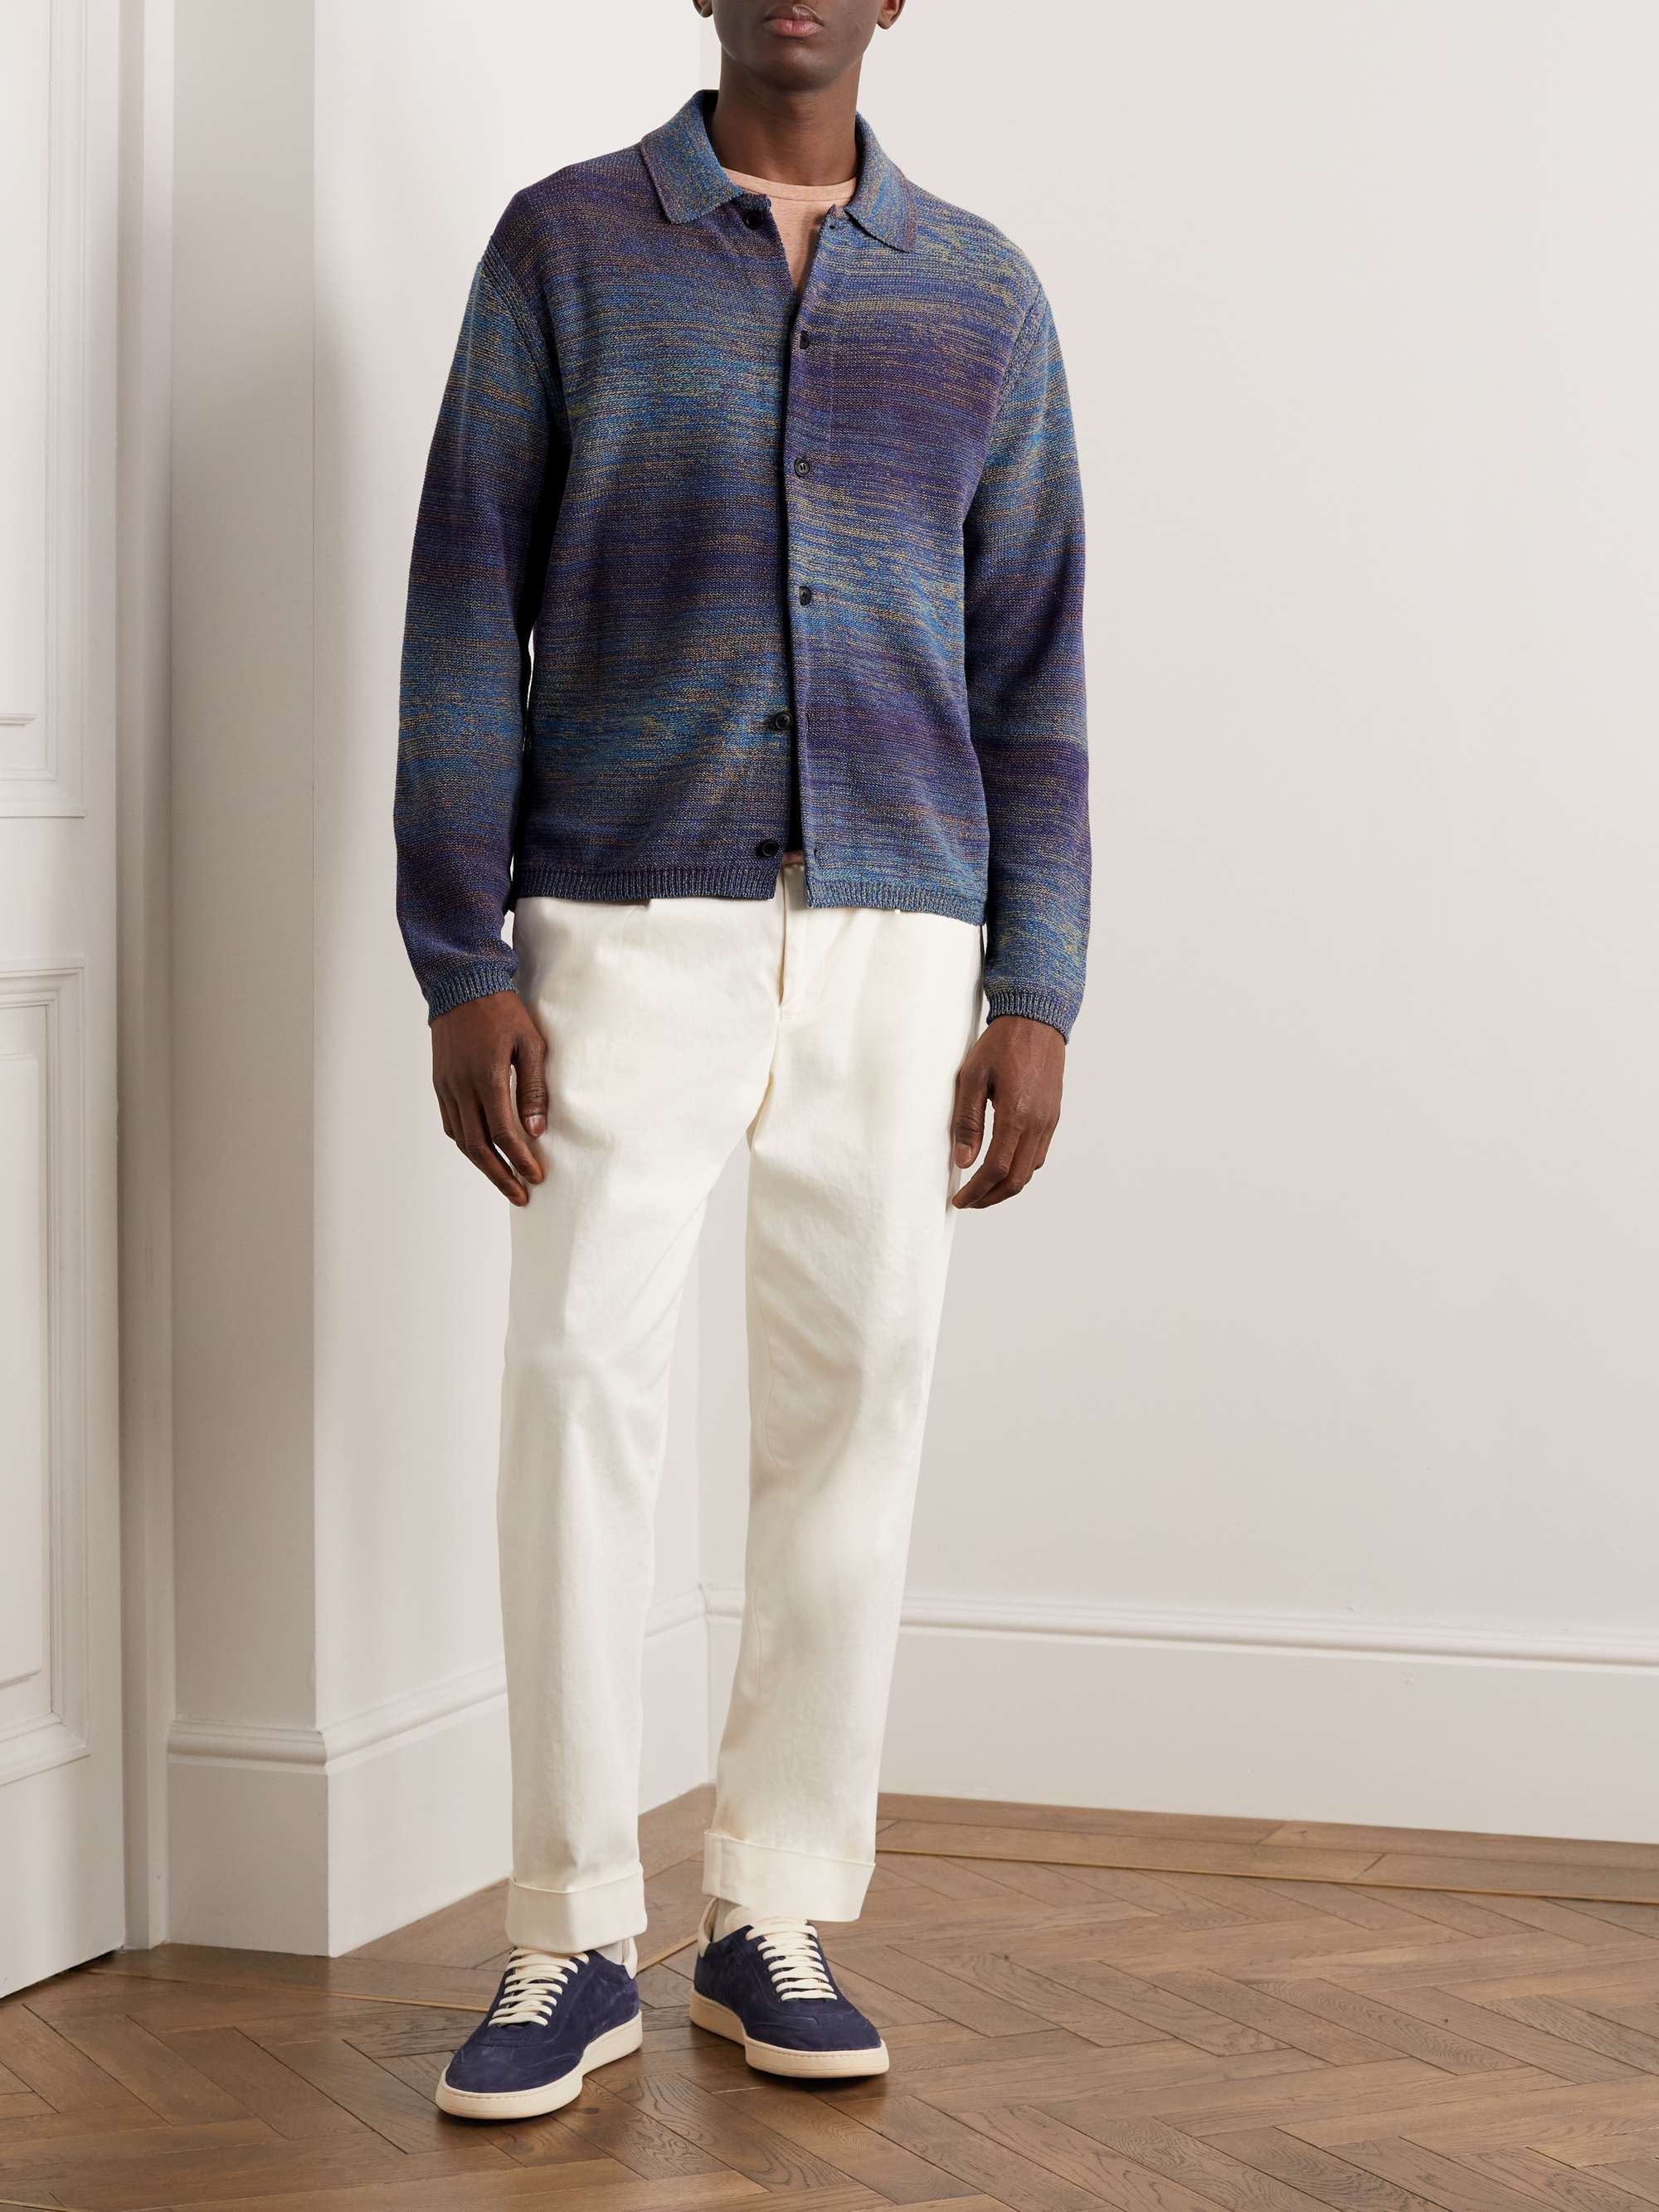 PAUL SMITH Space-Dyed Cotton-Blend Cardigan for Men | MR PORTER